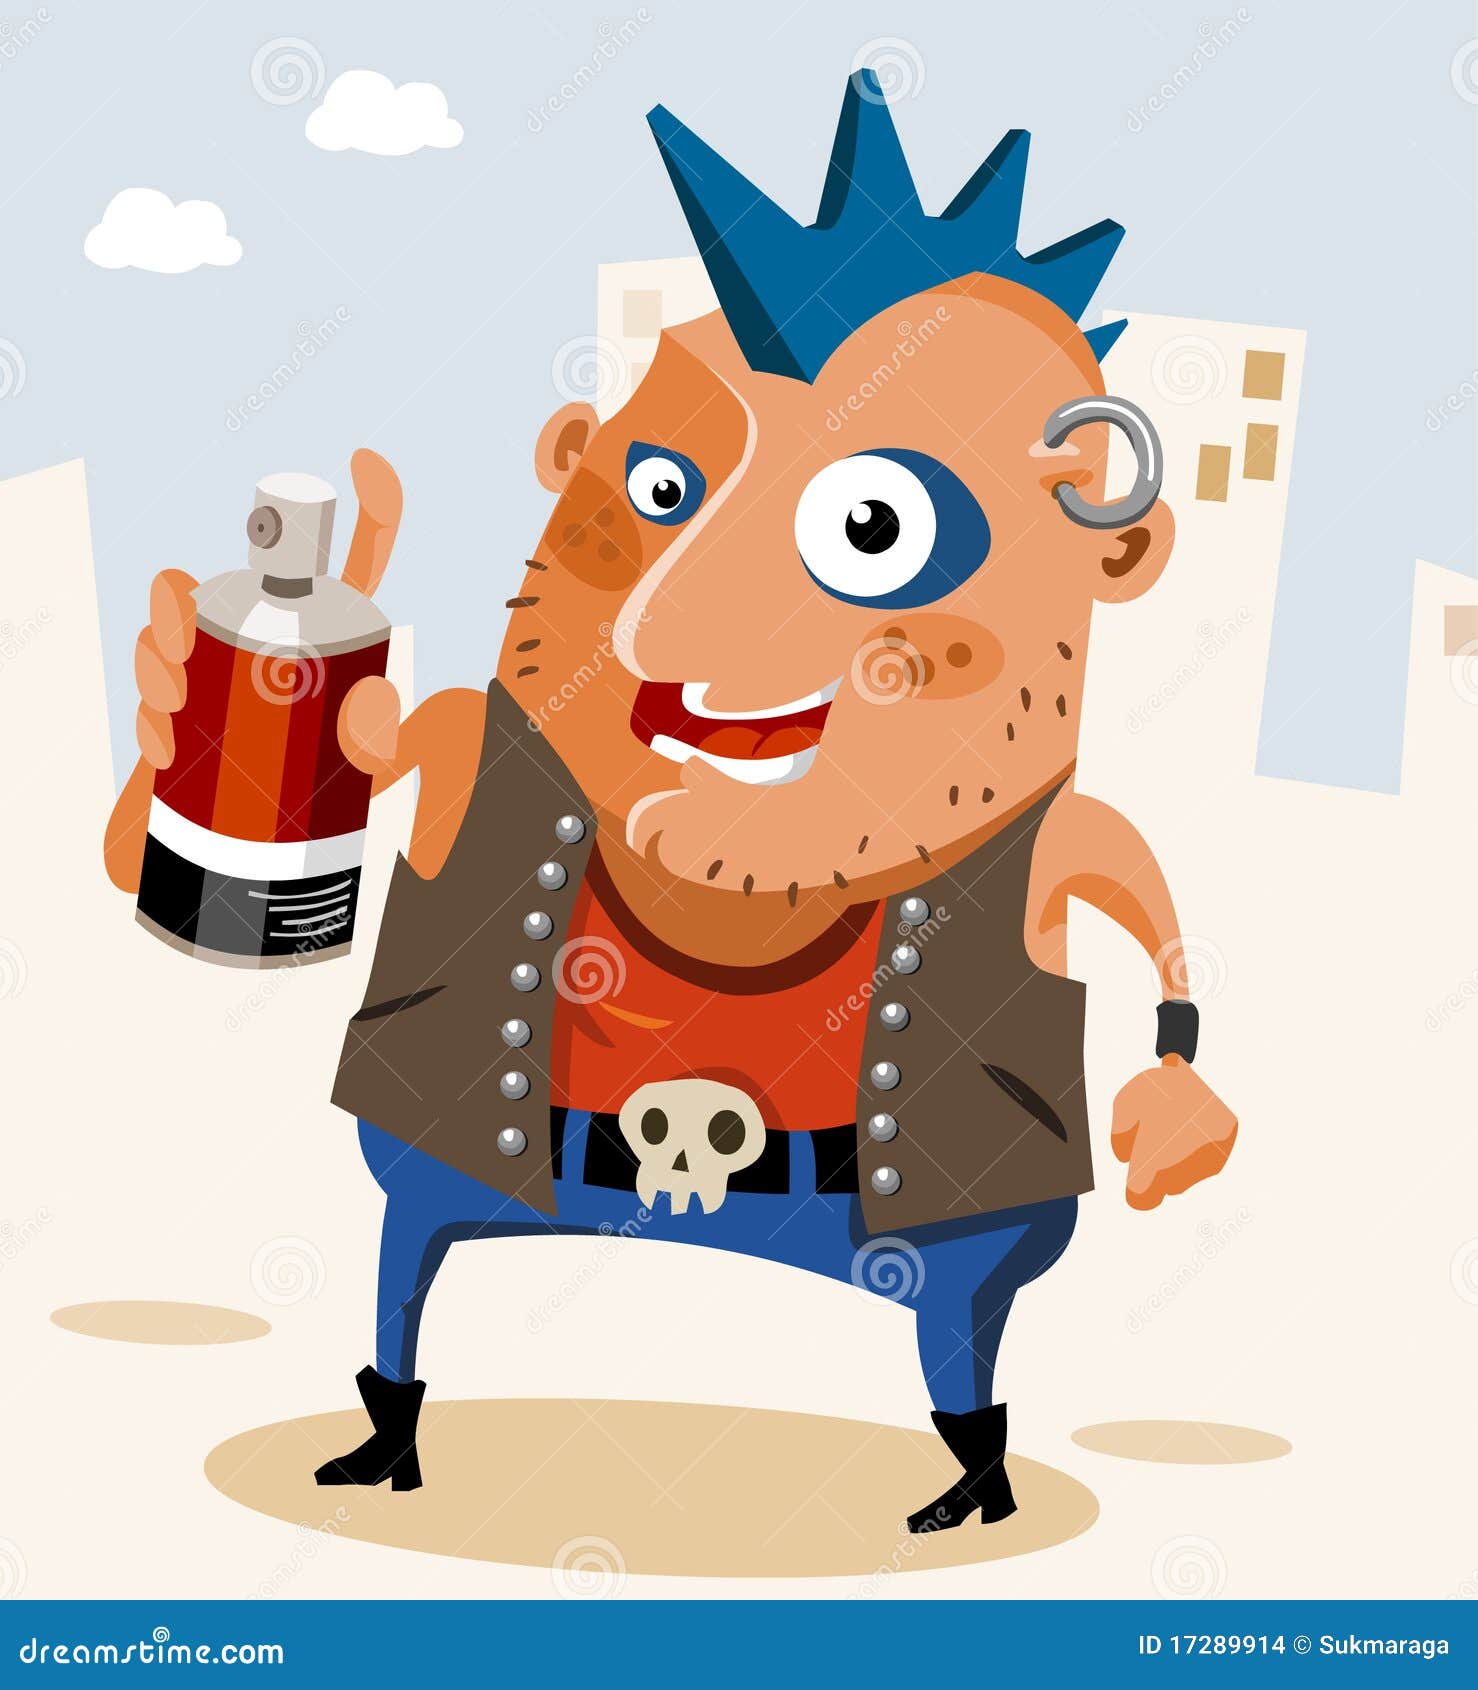 Mohawk Boy with Aerosol Can Stock Vector - Illustration of punk, young ...